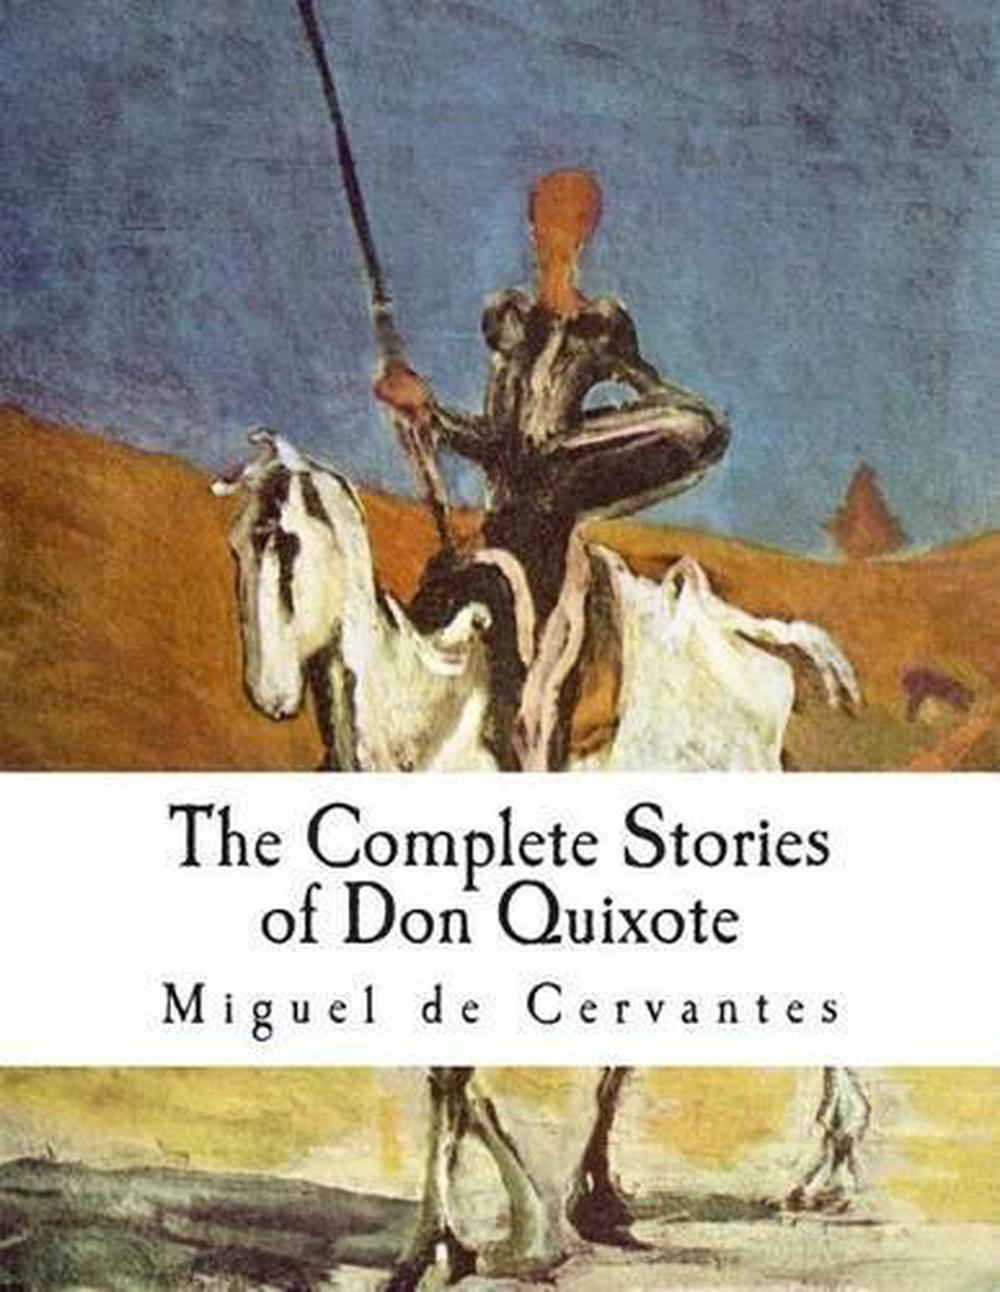 Stories Of Don Quixote Written Anew For Children by James Baldwin